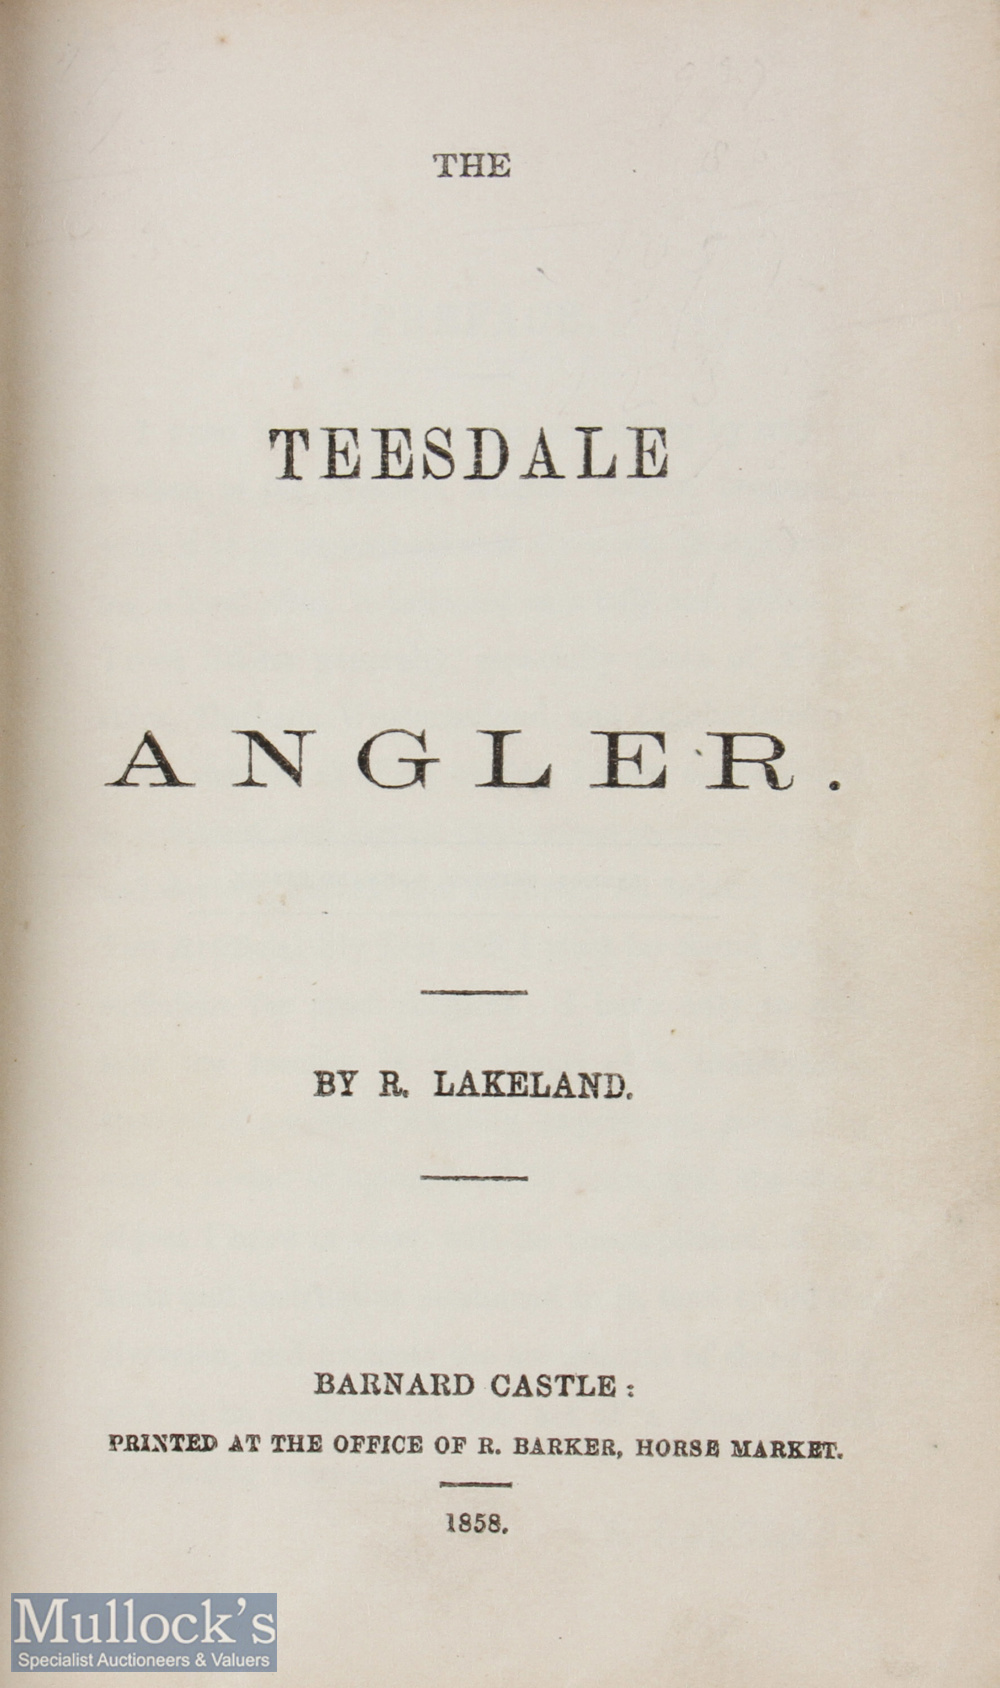 1858 The Teesdale Angler R Lakeland Published by R Barker, Barnard Castle, 1858 in red card covers - Image 2 of 2